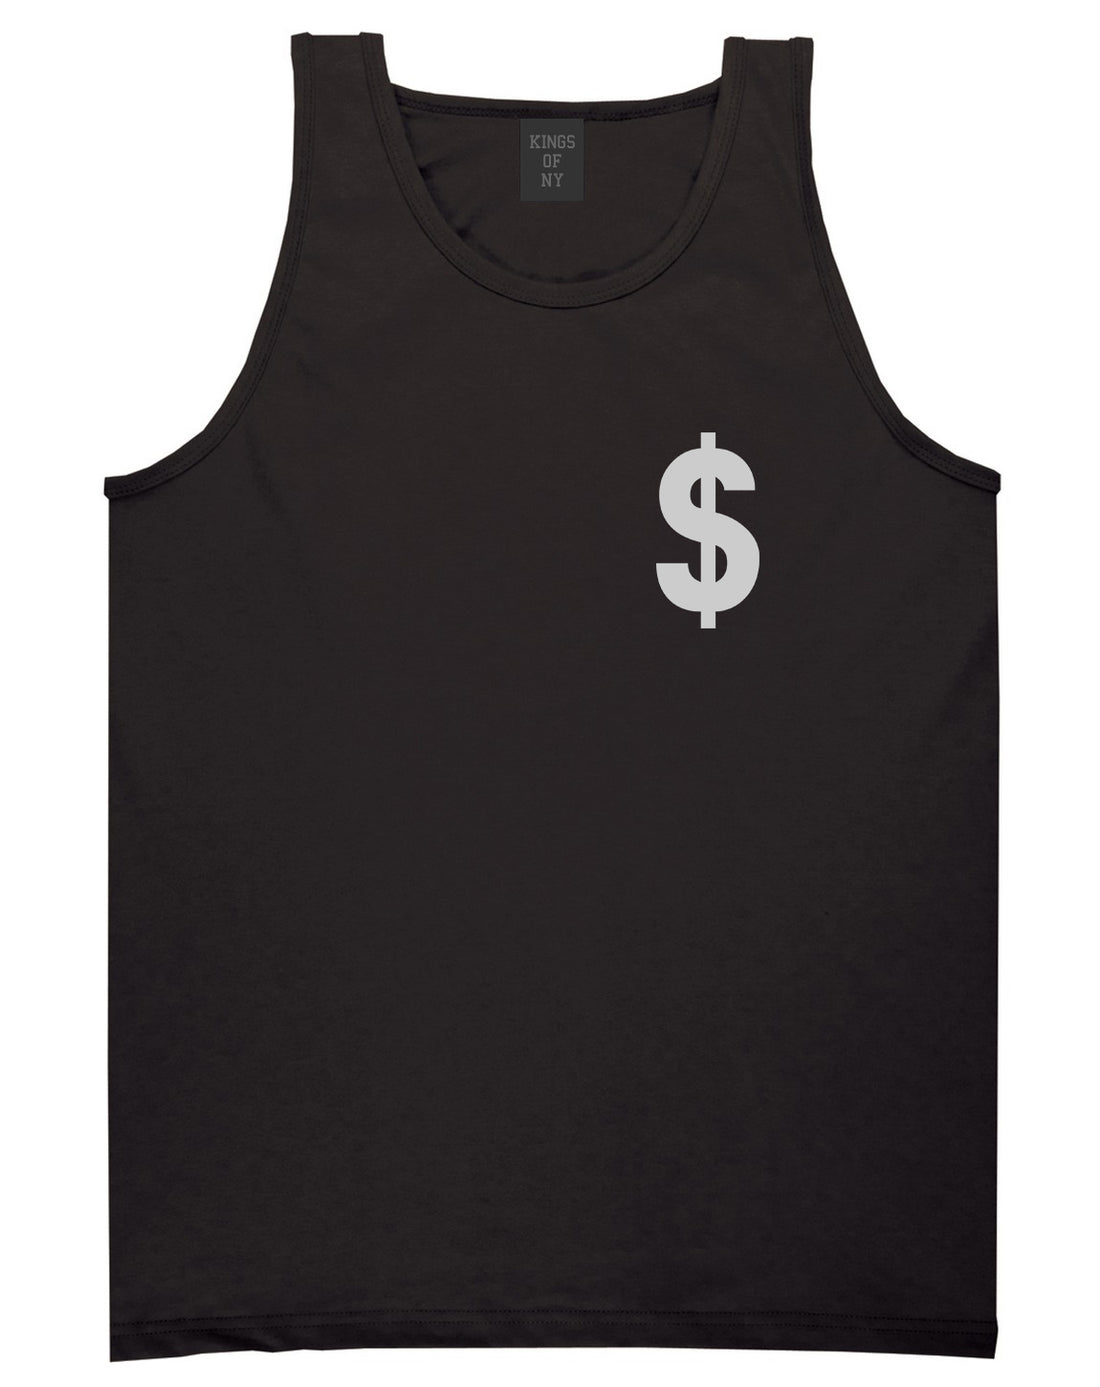 Dollar_Sign_Simple_Chest Mens Black Tank Top Shirt by Kings Of NY